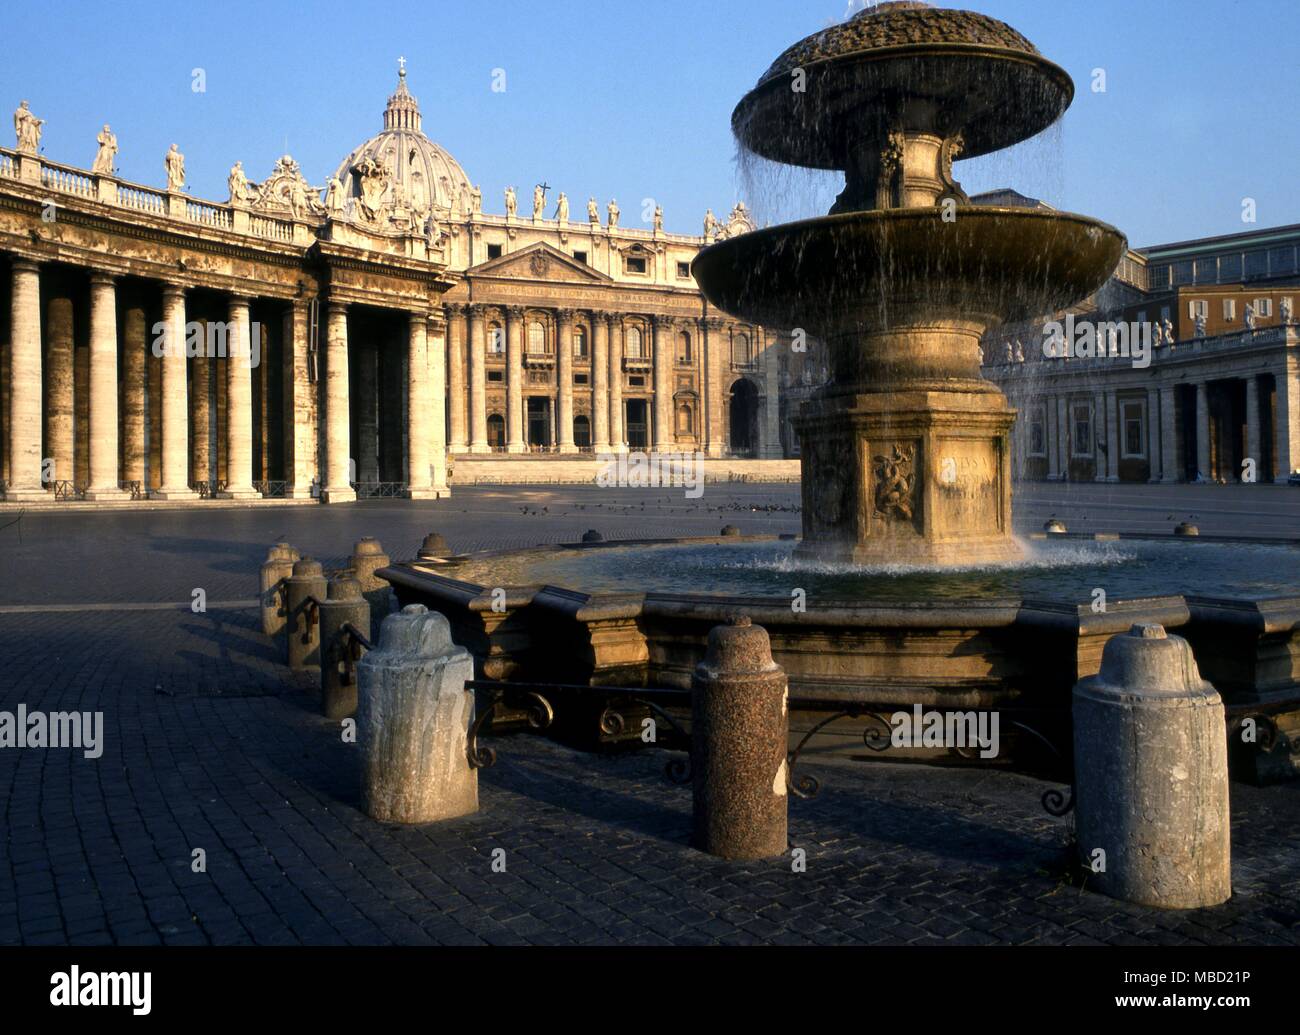 Fountain in St Peter's Square, Rome. Stock Photo